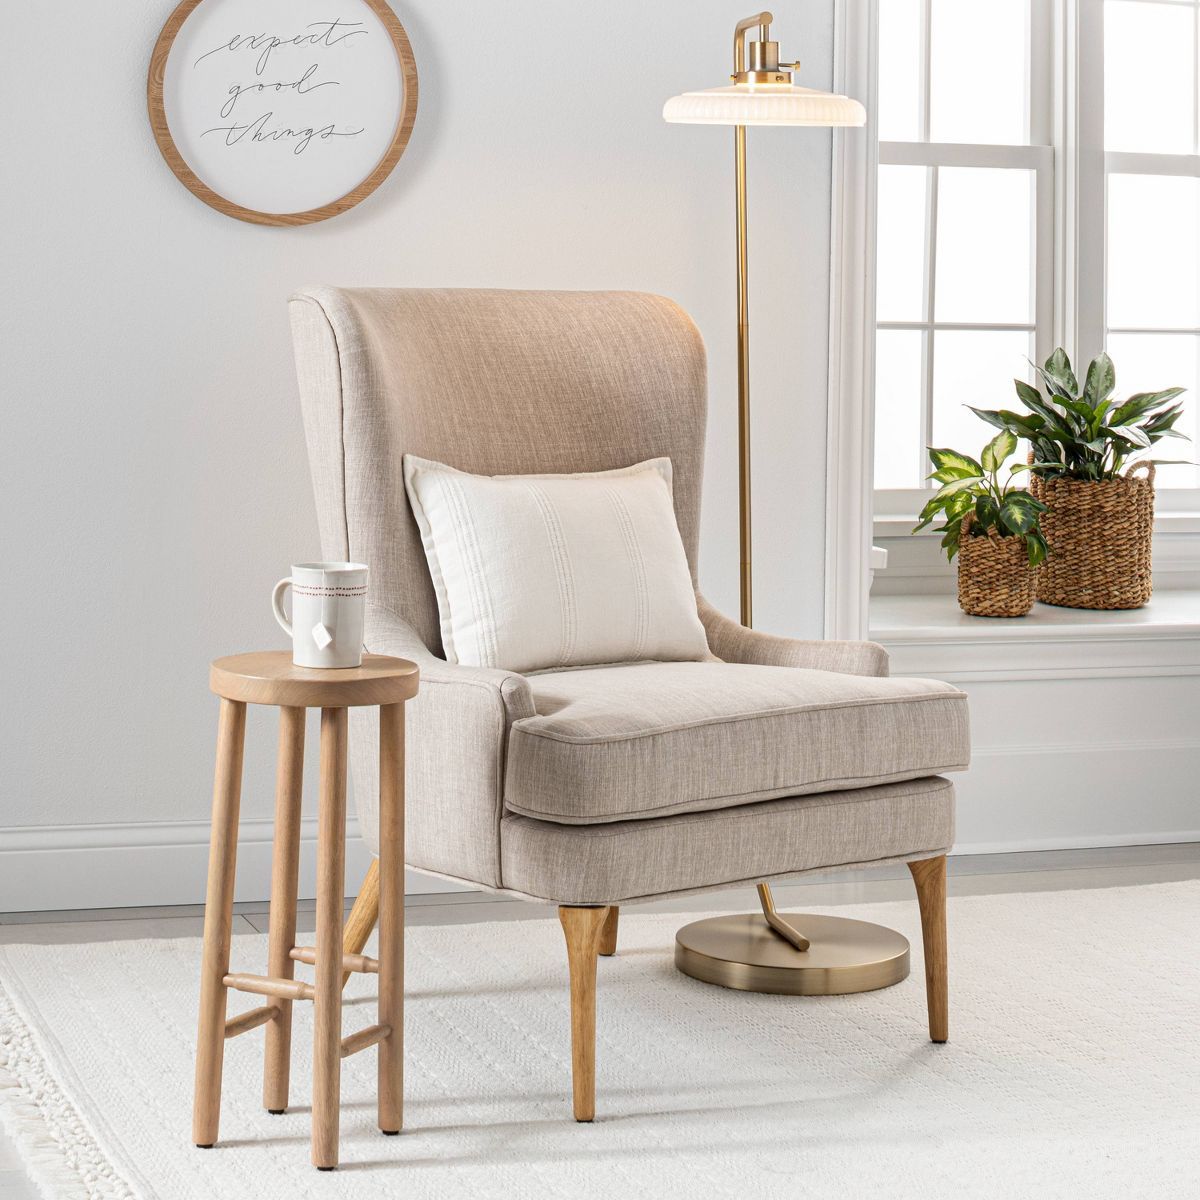 Shaker Drink Side Table - Natural - Hearth & Hand™ with Magnolia | Target